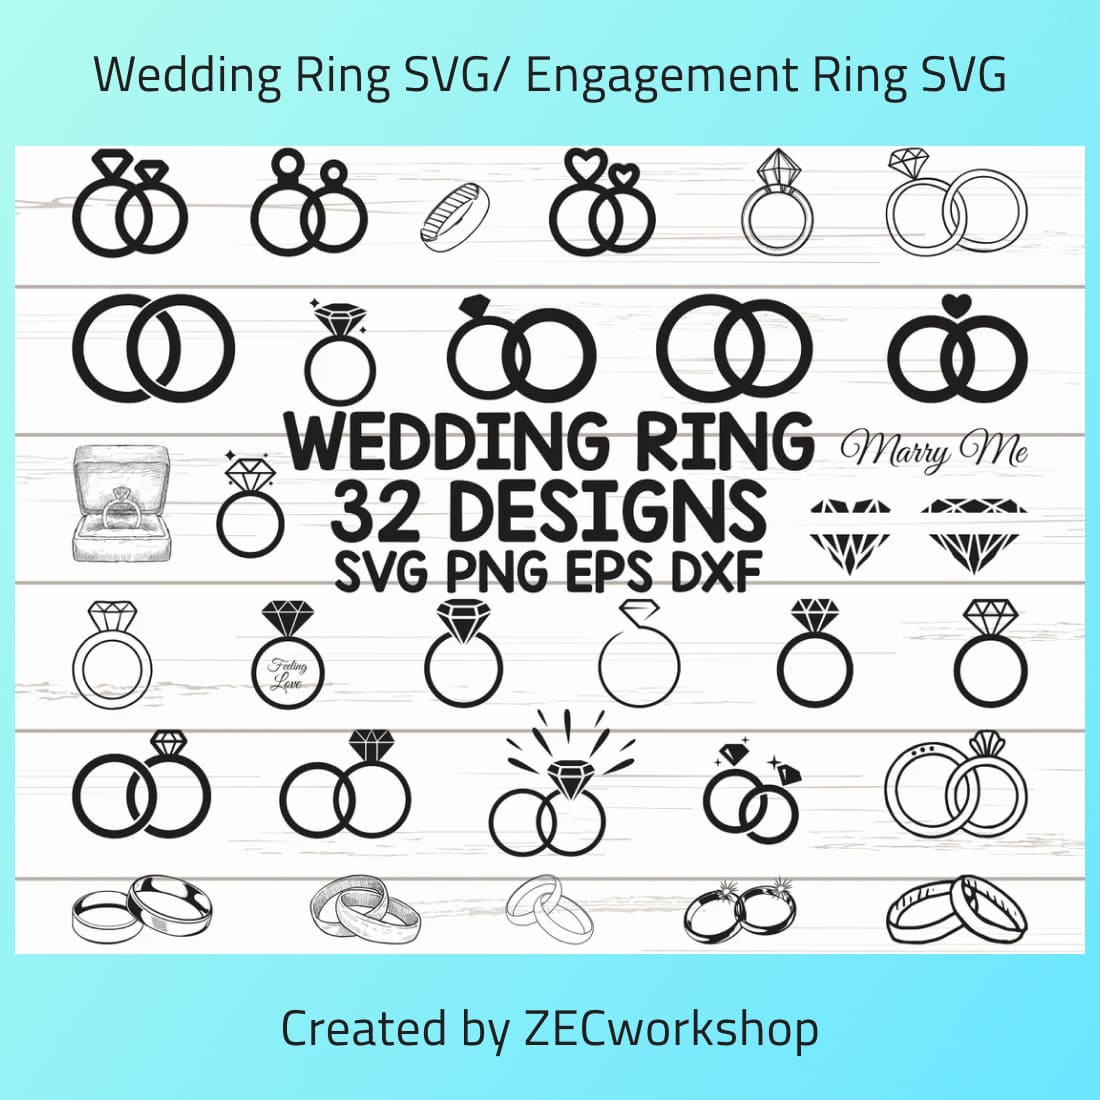 Engagement Ring SVG main cover.